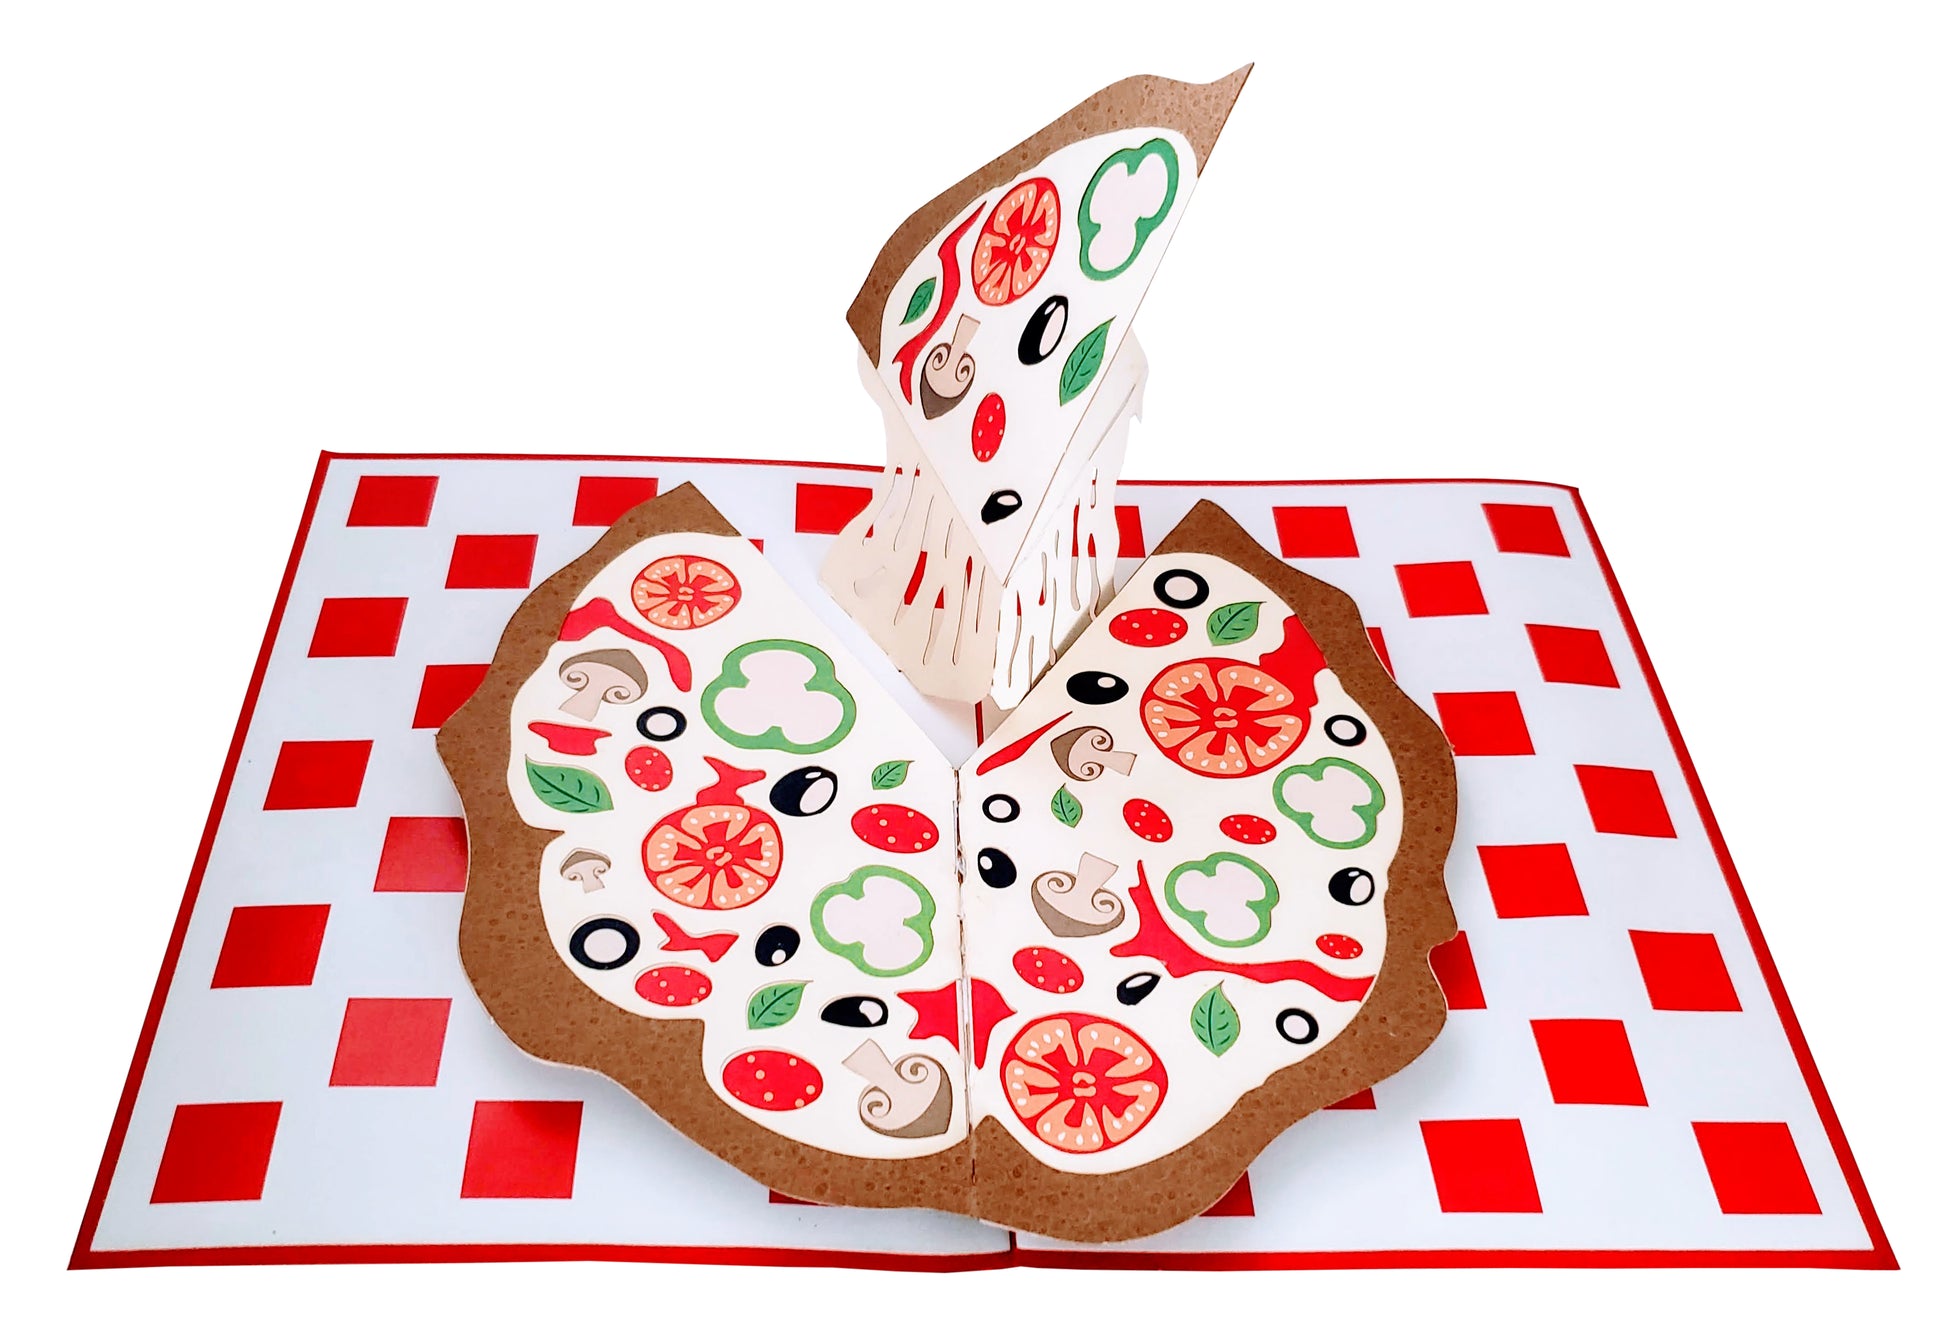 Gourmet Pizza 3D Pop Up Greeting Card - All Occasion - Birthday - Celebration - Centerpiece - Cute - iGifts And Cards